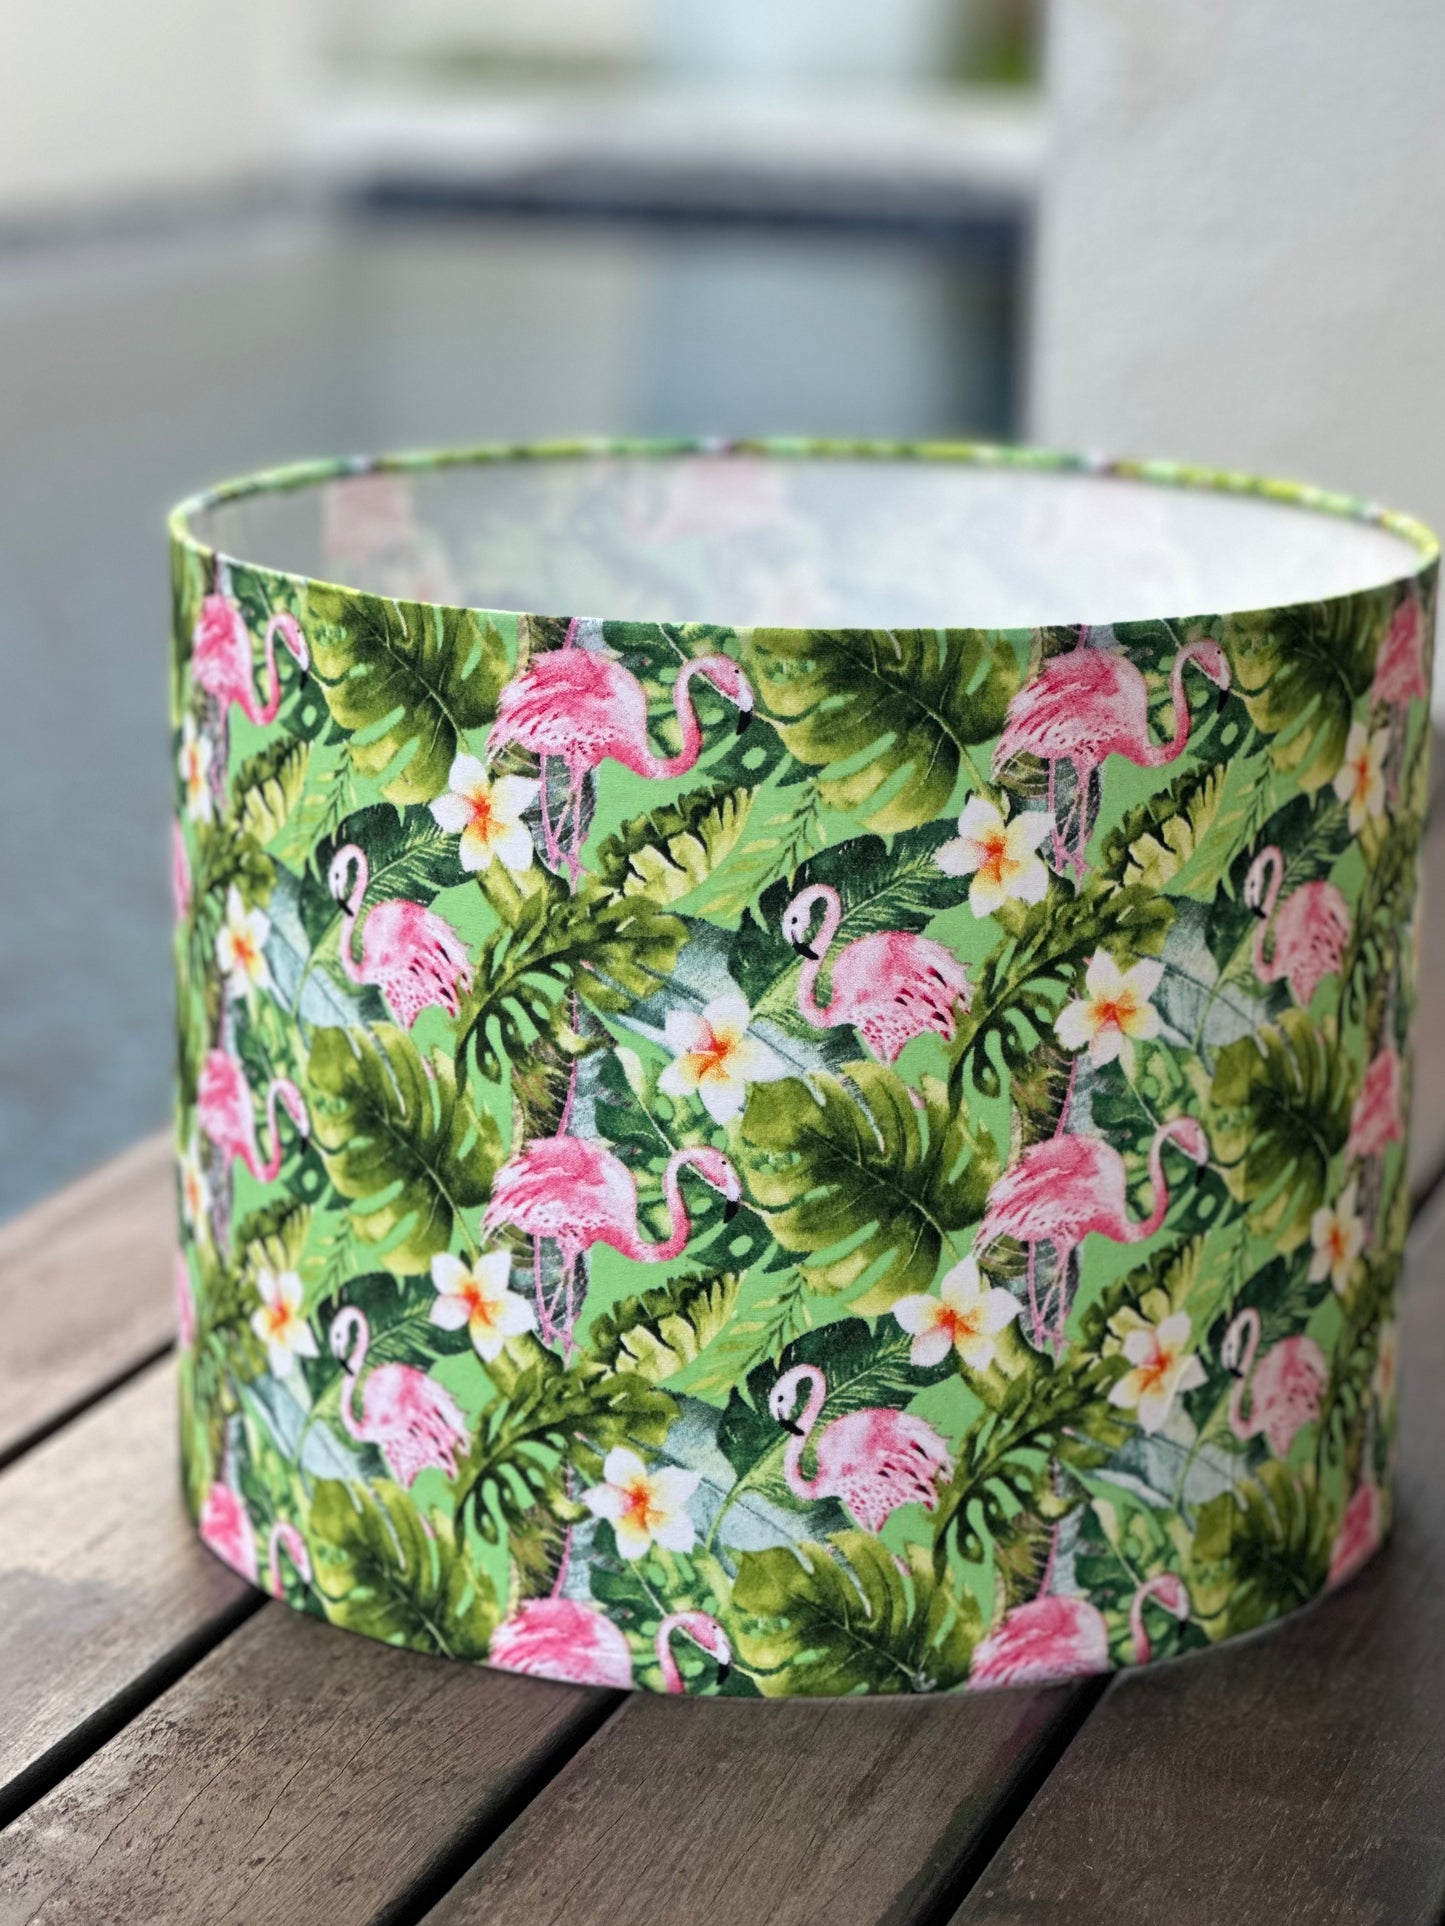 Handmade fabric lampshades Singapore in tropical flamingo and leaf pattern design